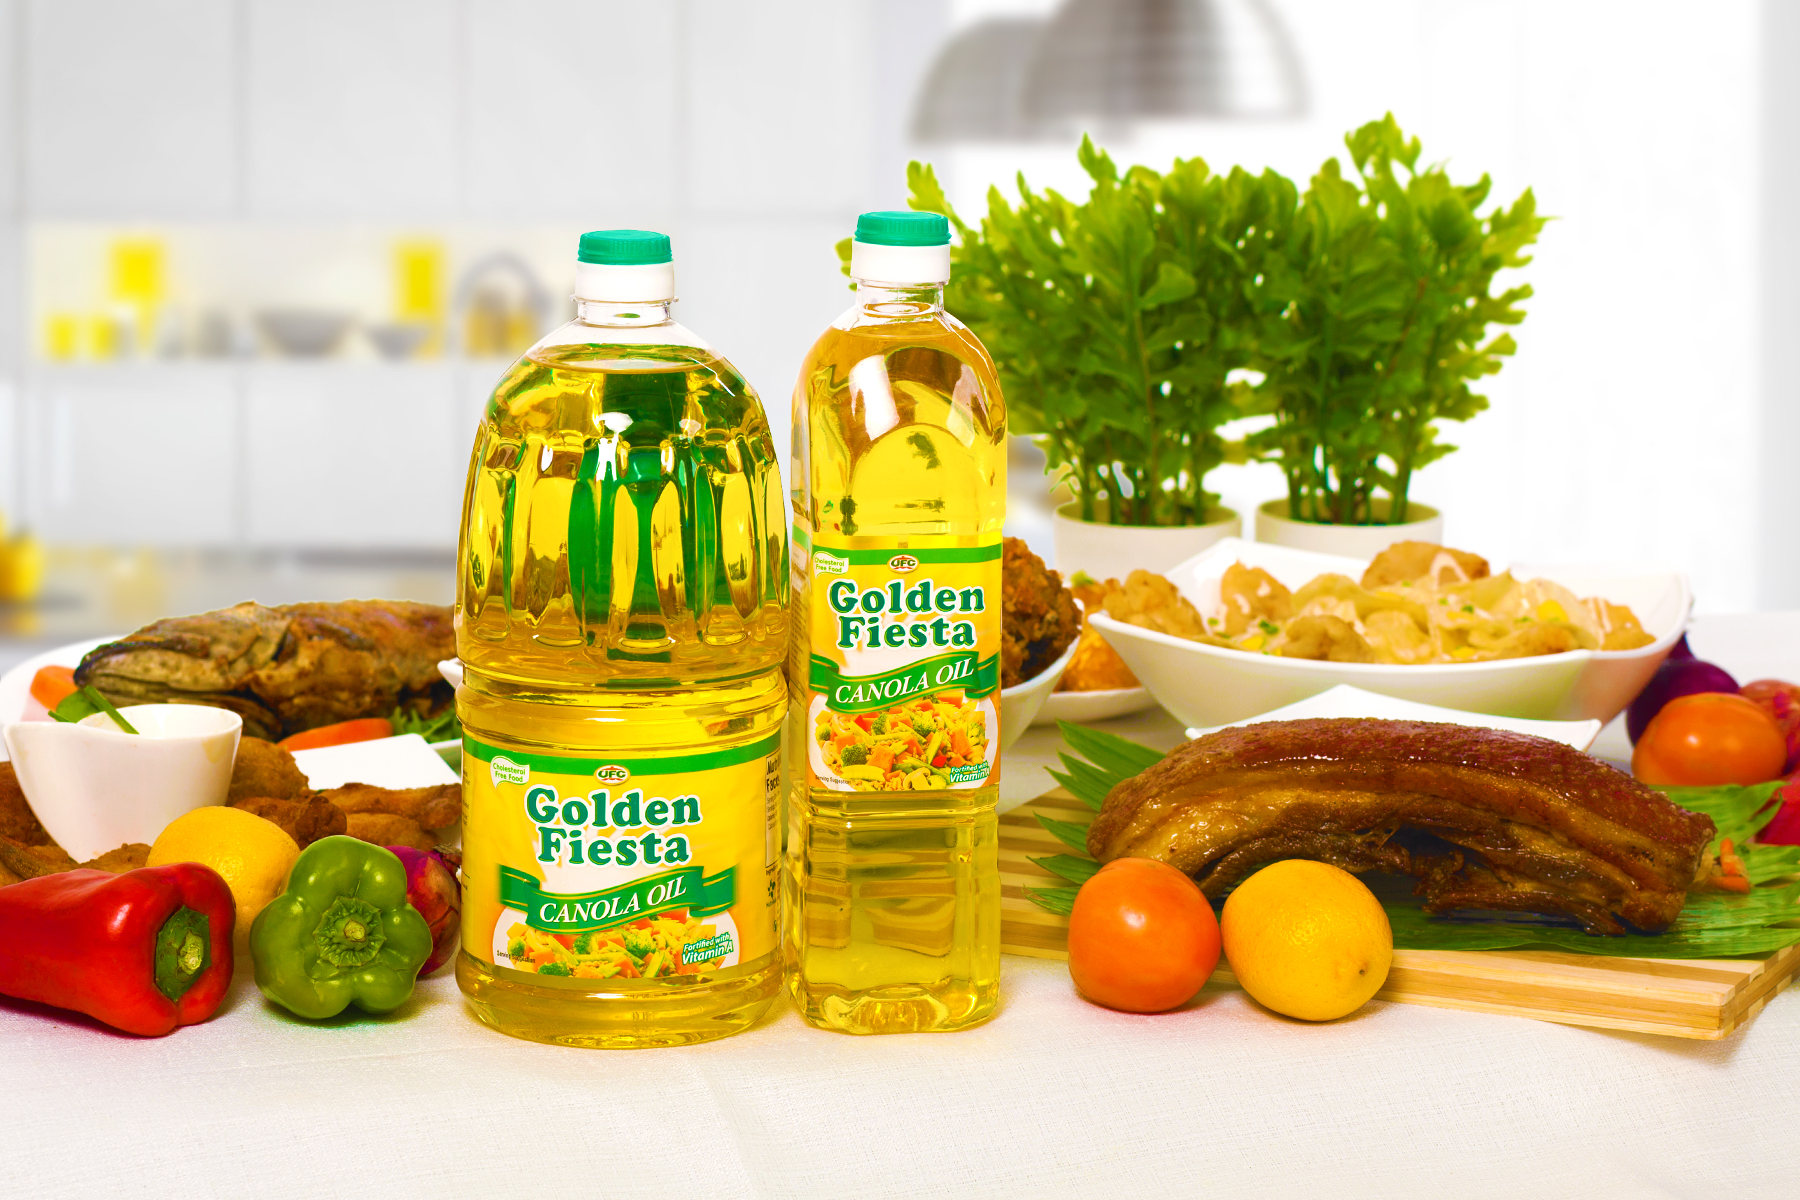 HEART FRIENDLY. Canola oil, like Golden Fiesta, is considered as a healthy oil among the number of cooking oils in the market for its reported benefits for the heart. Photo courtesy of NutriAsia 